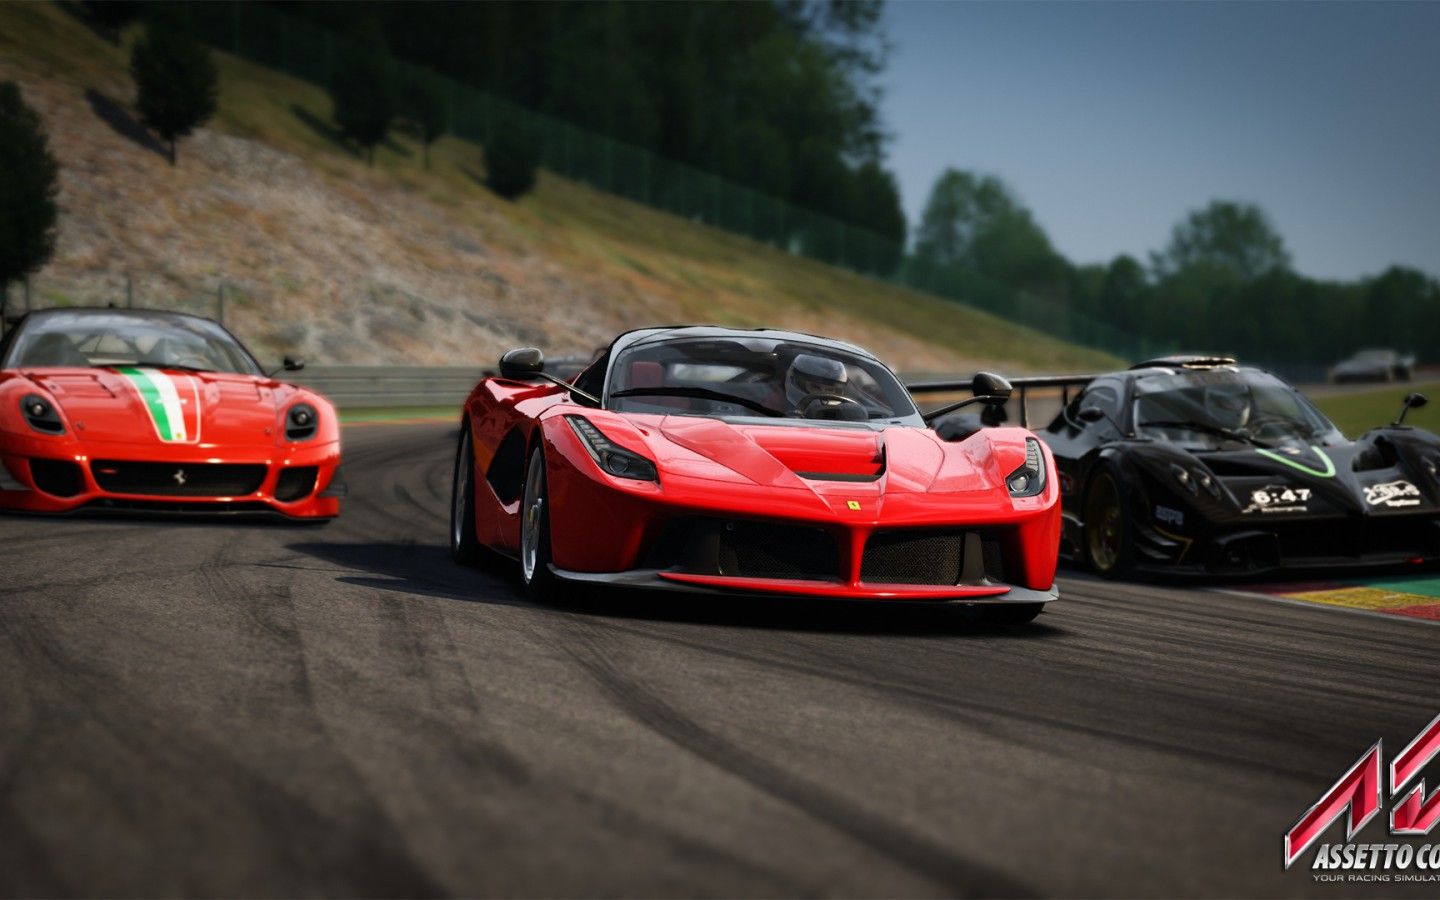 Assetto Corsa 1.0 is out now!